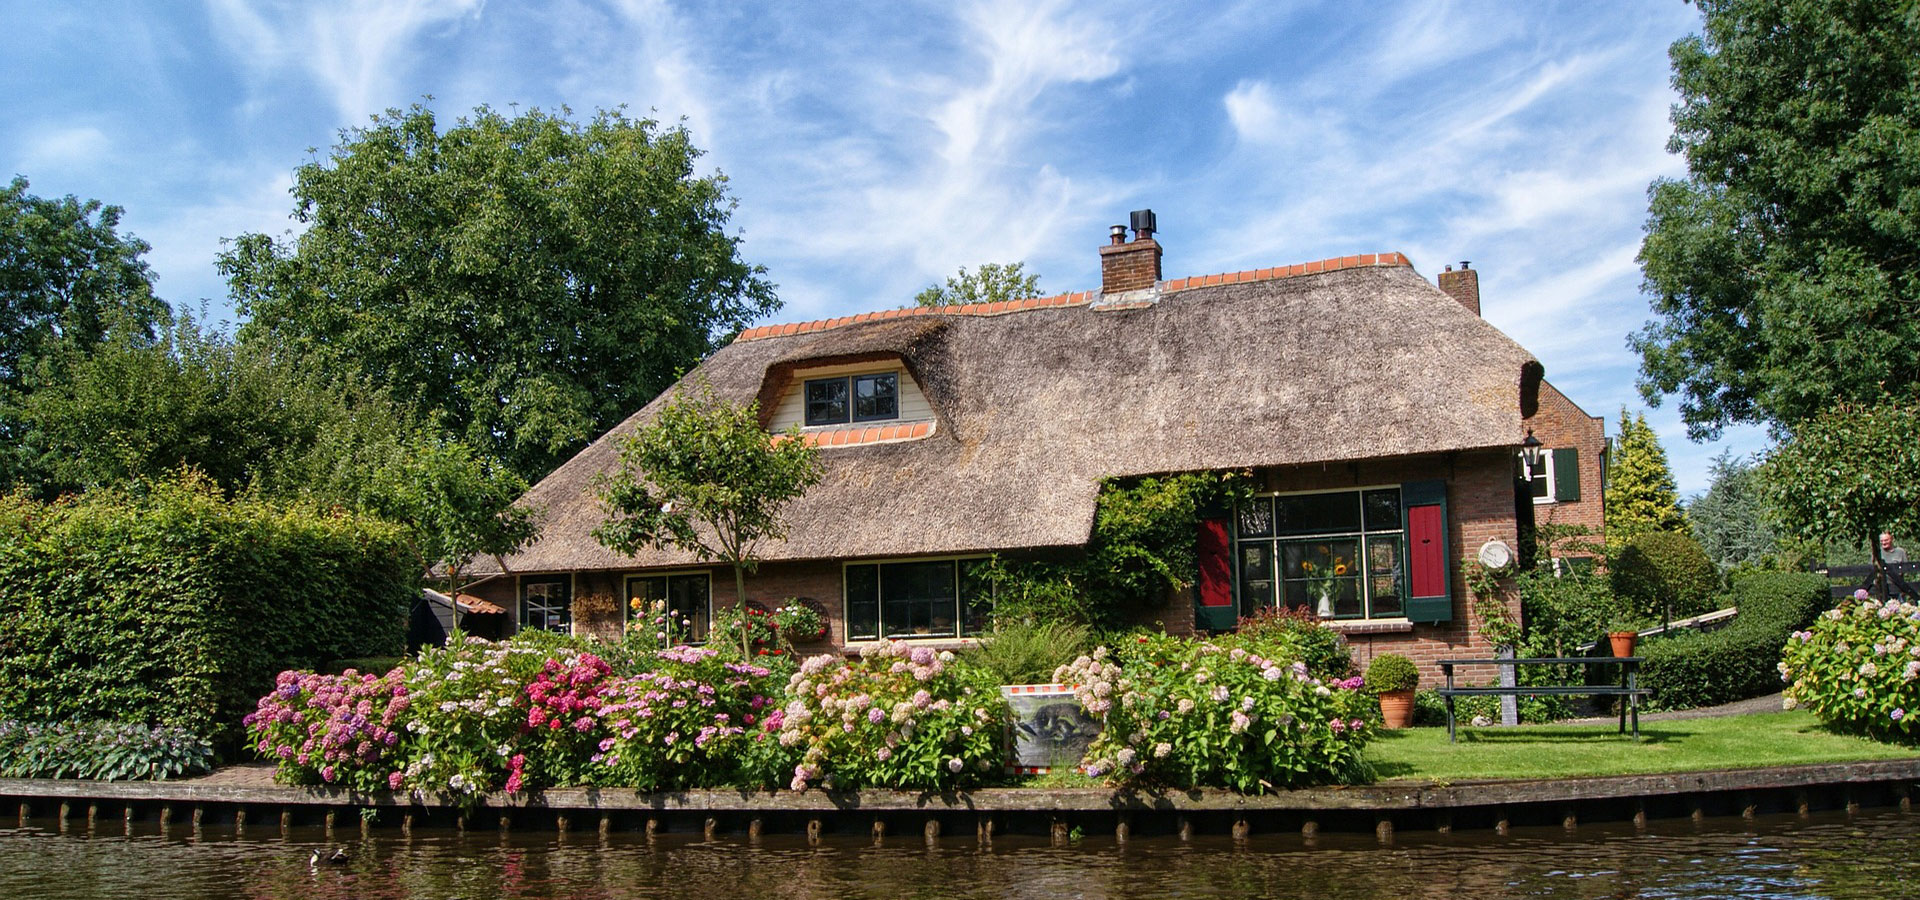 Thatched Home Insurance - The Home Insurer